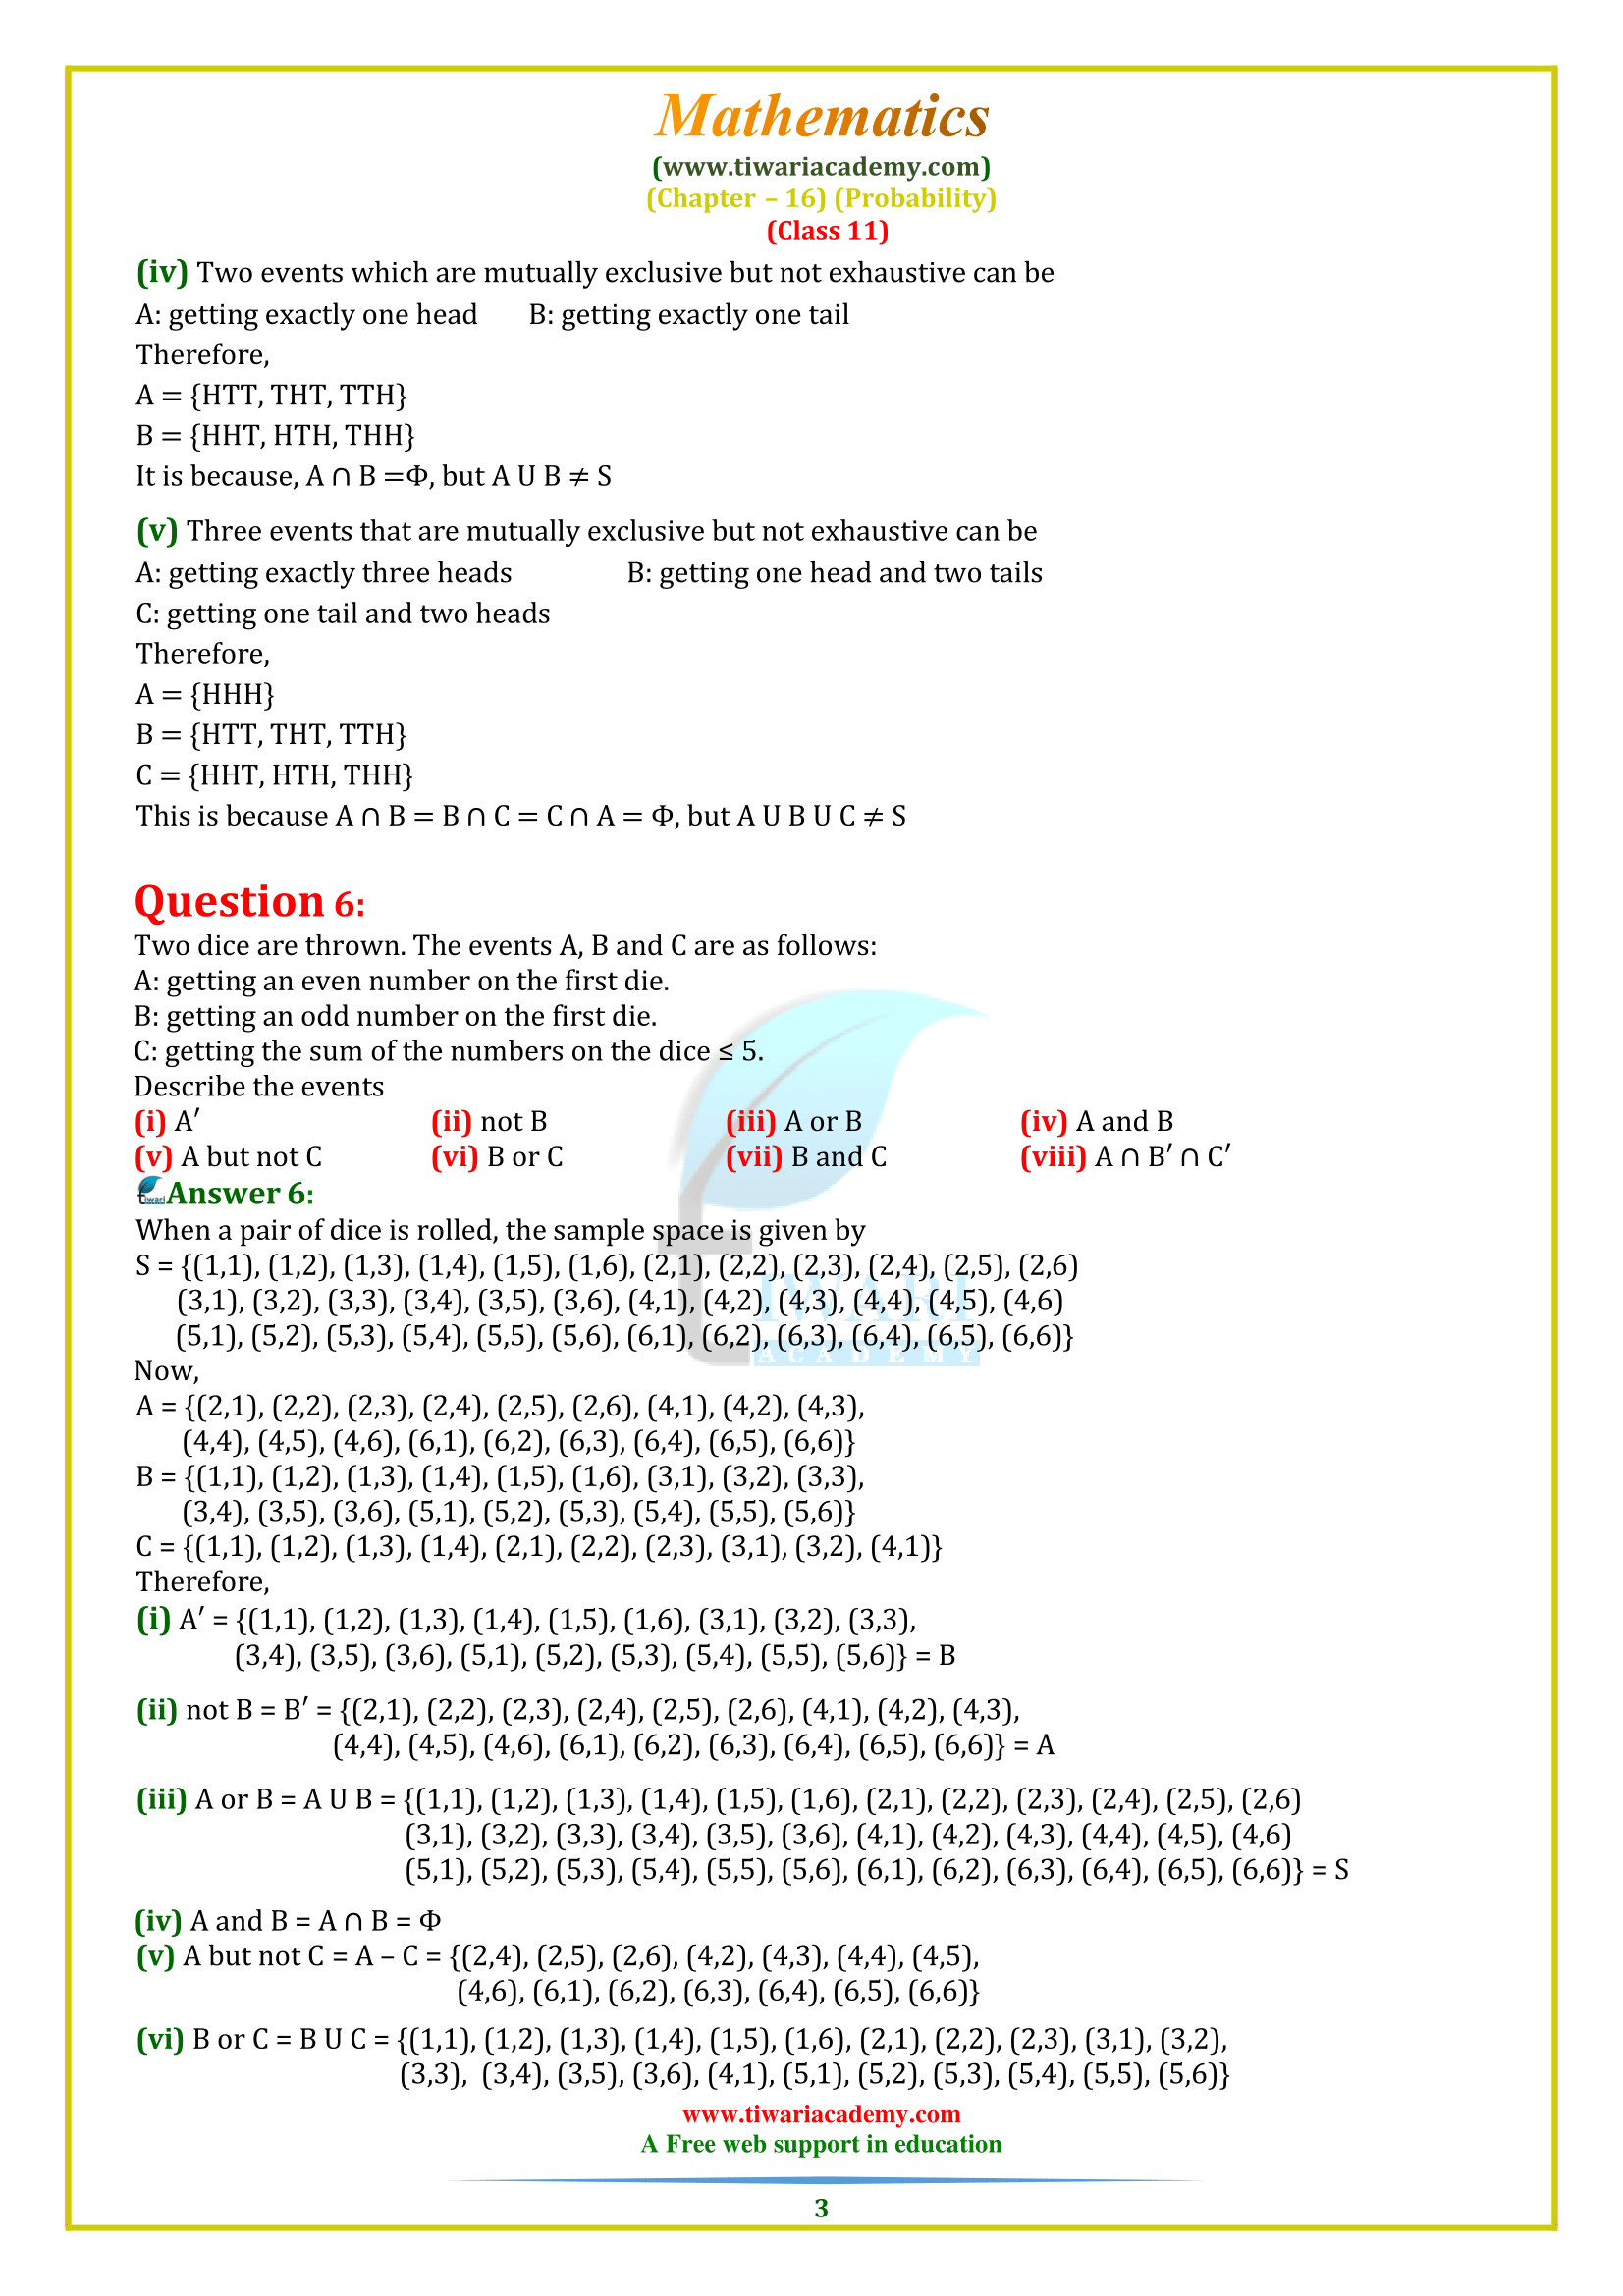 11 maths exercise 16.2 in pdf form